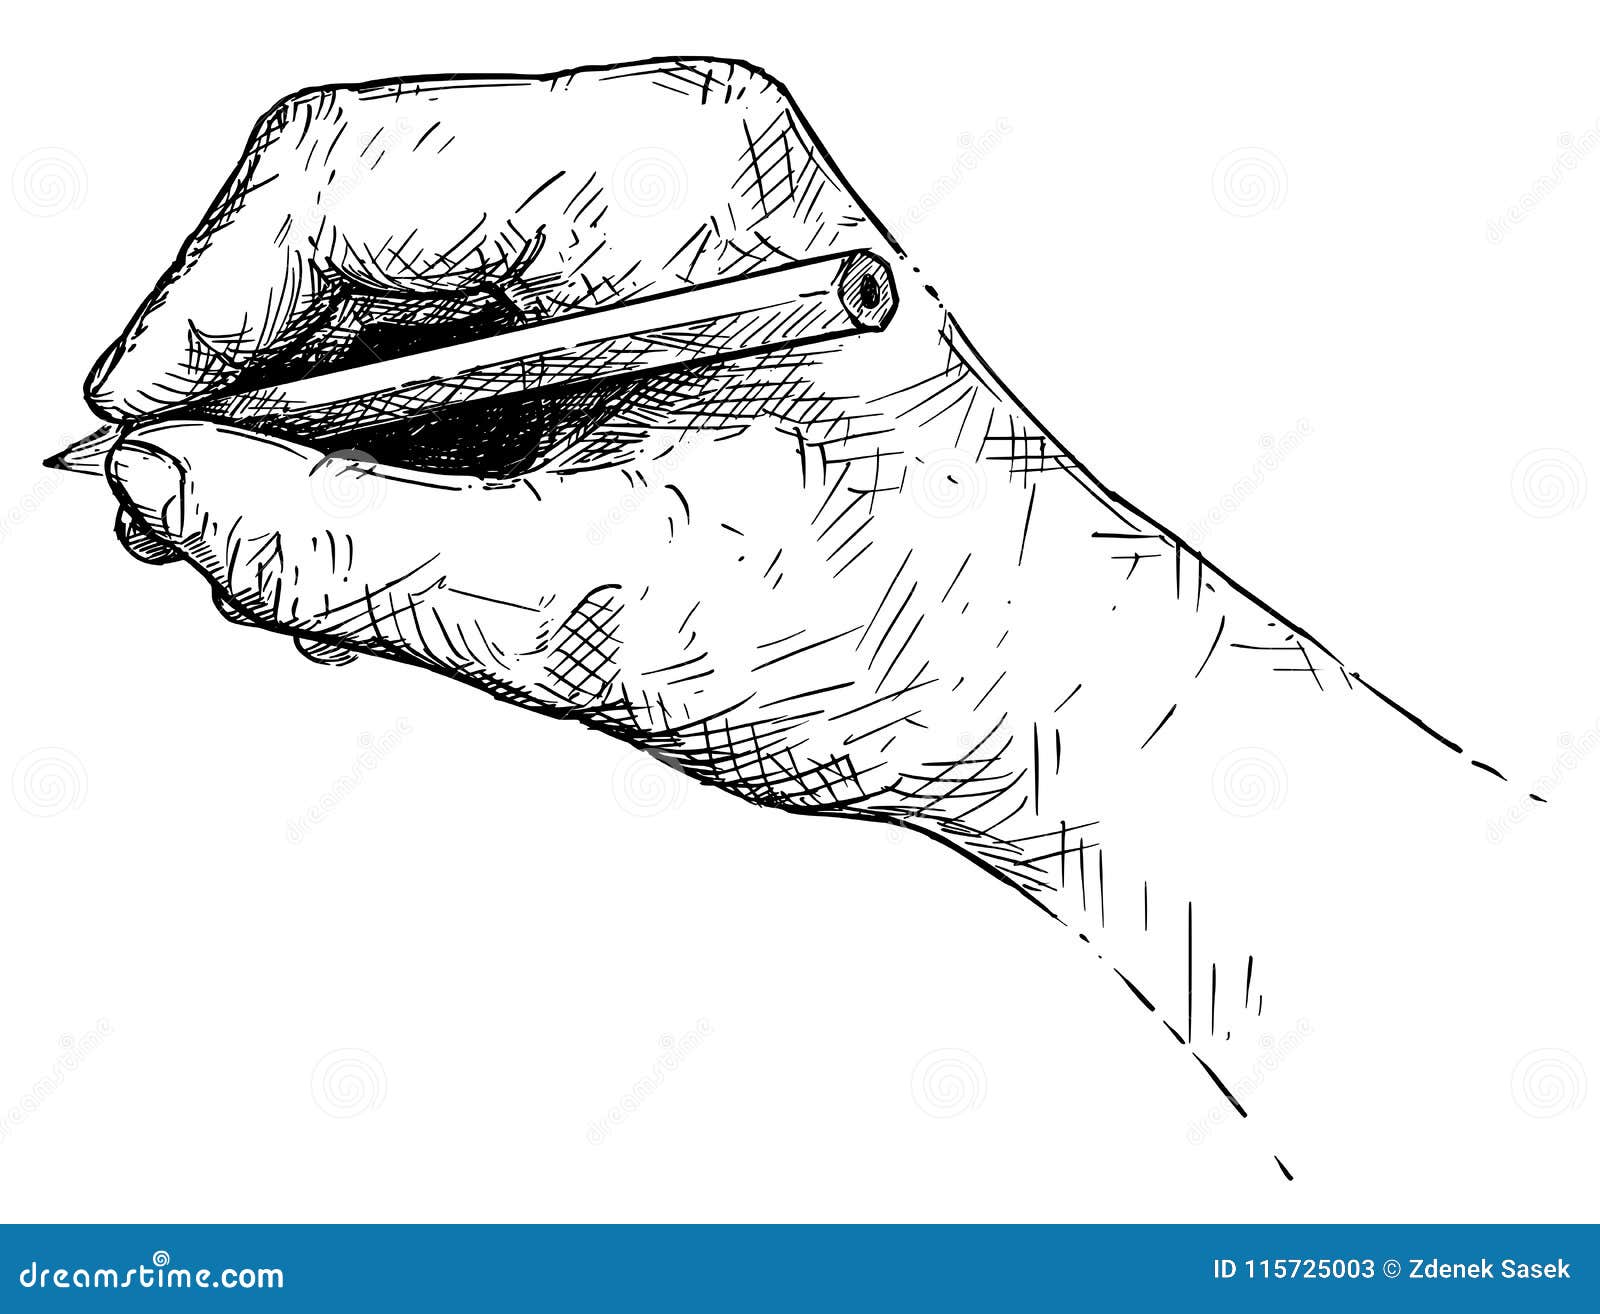  artistic  or drawing of hand writing or sketching with pencil